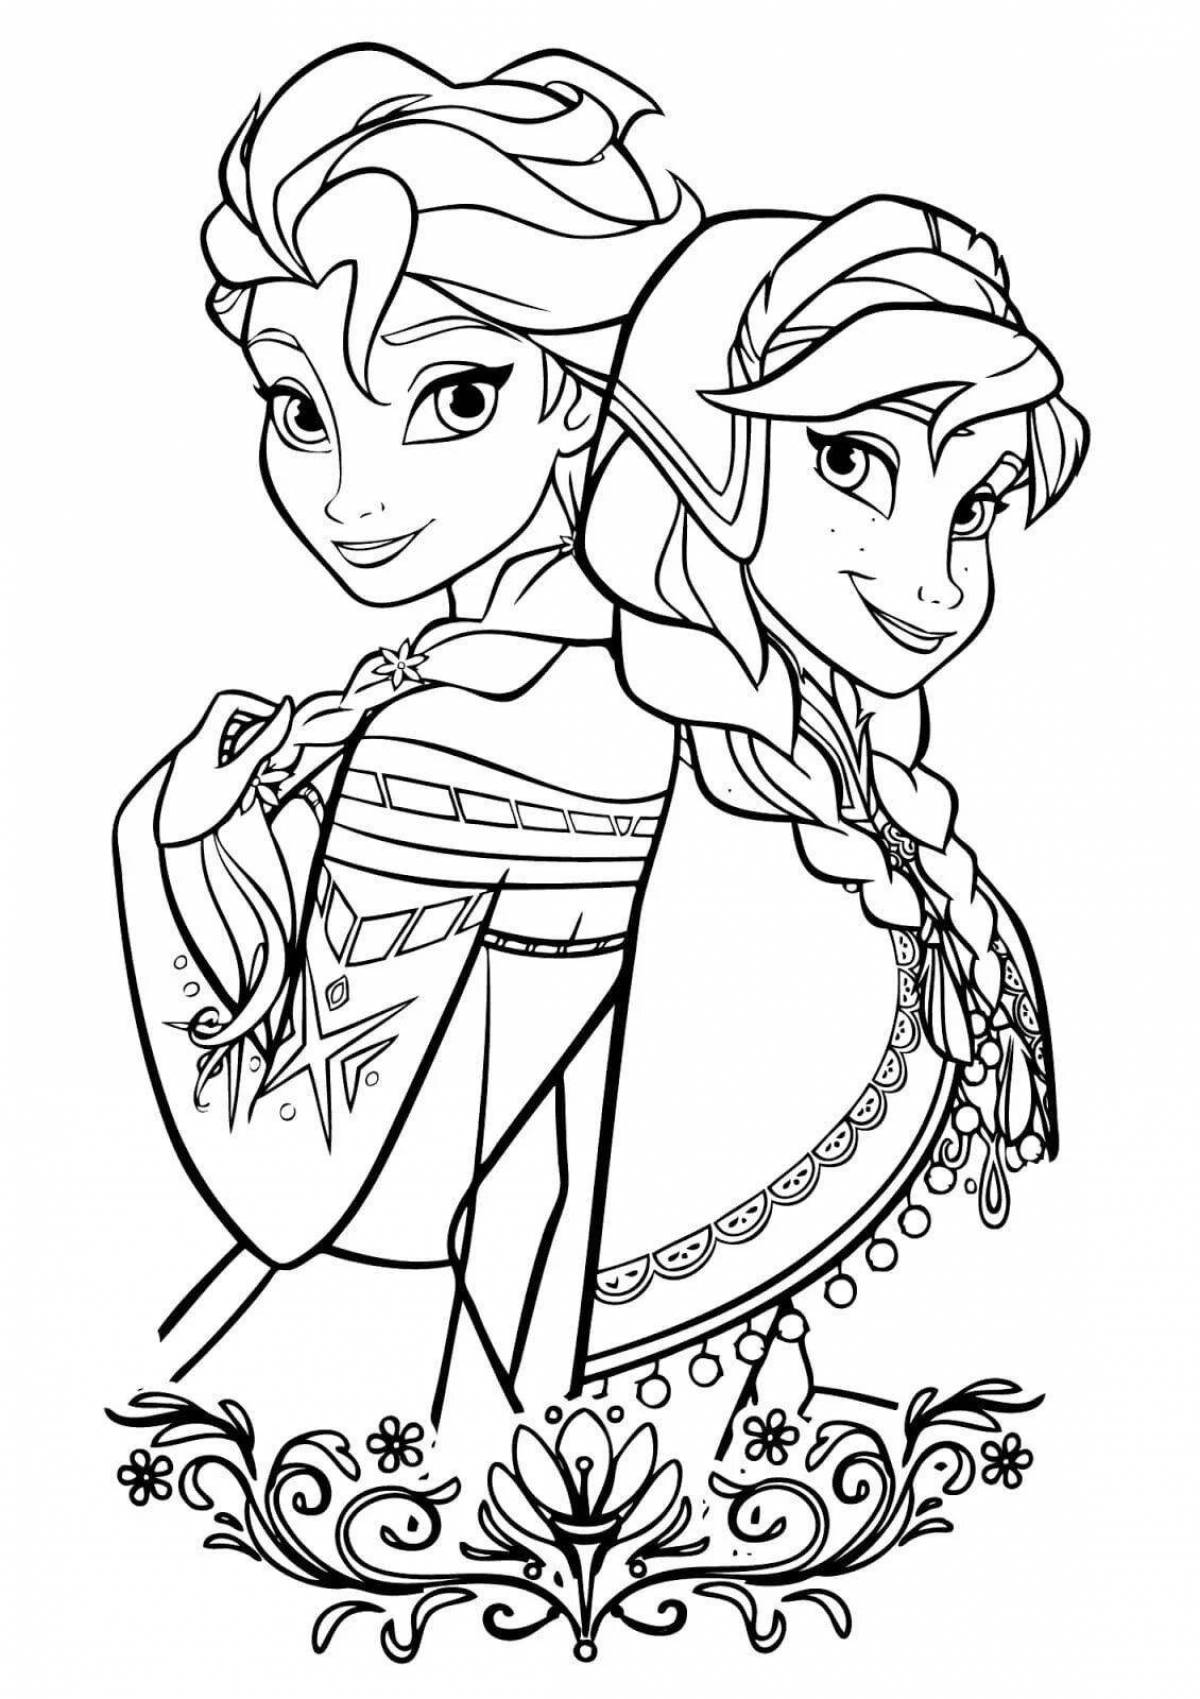 Elsa and anna in good quality #1